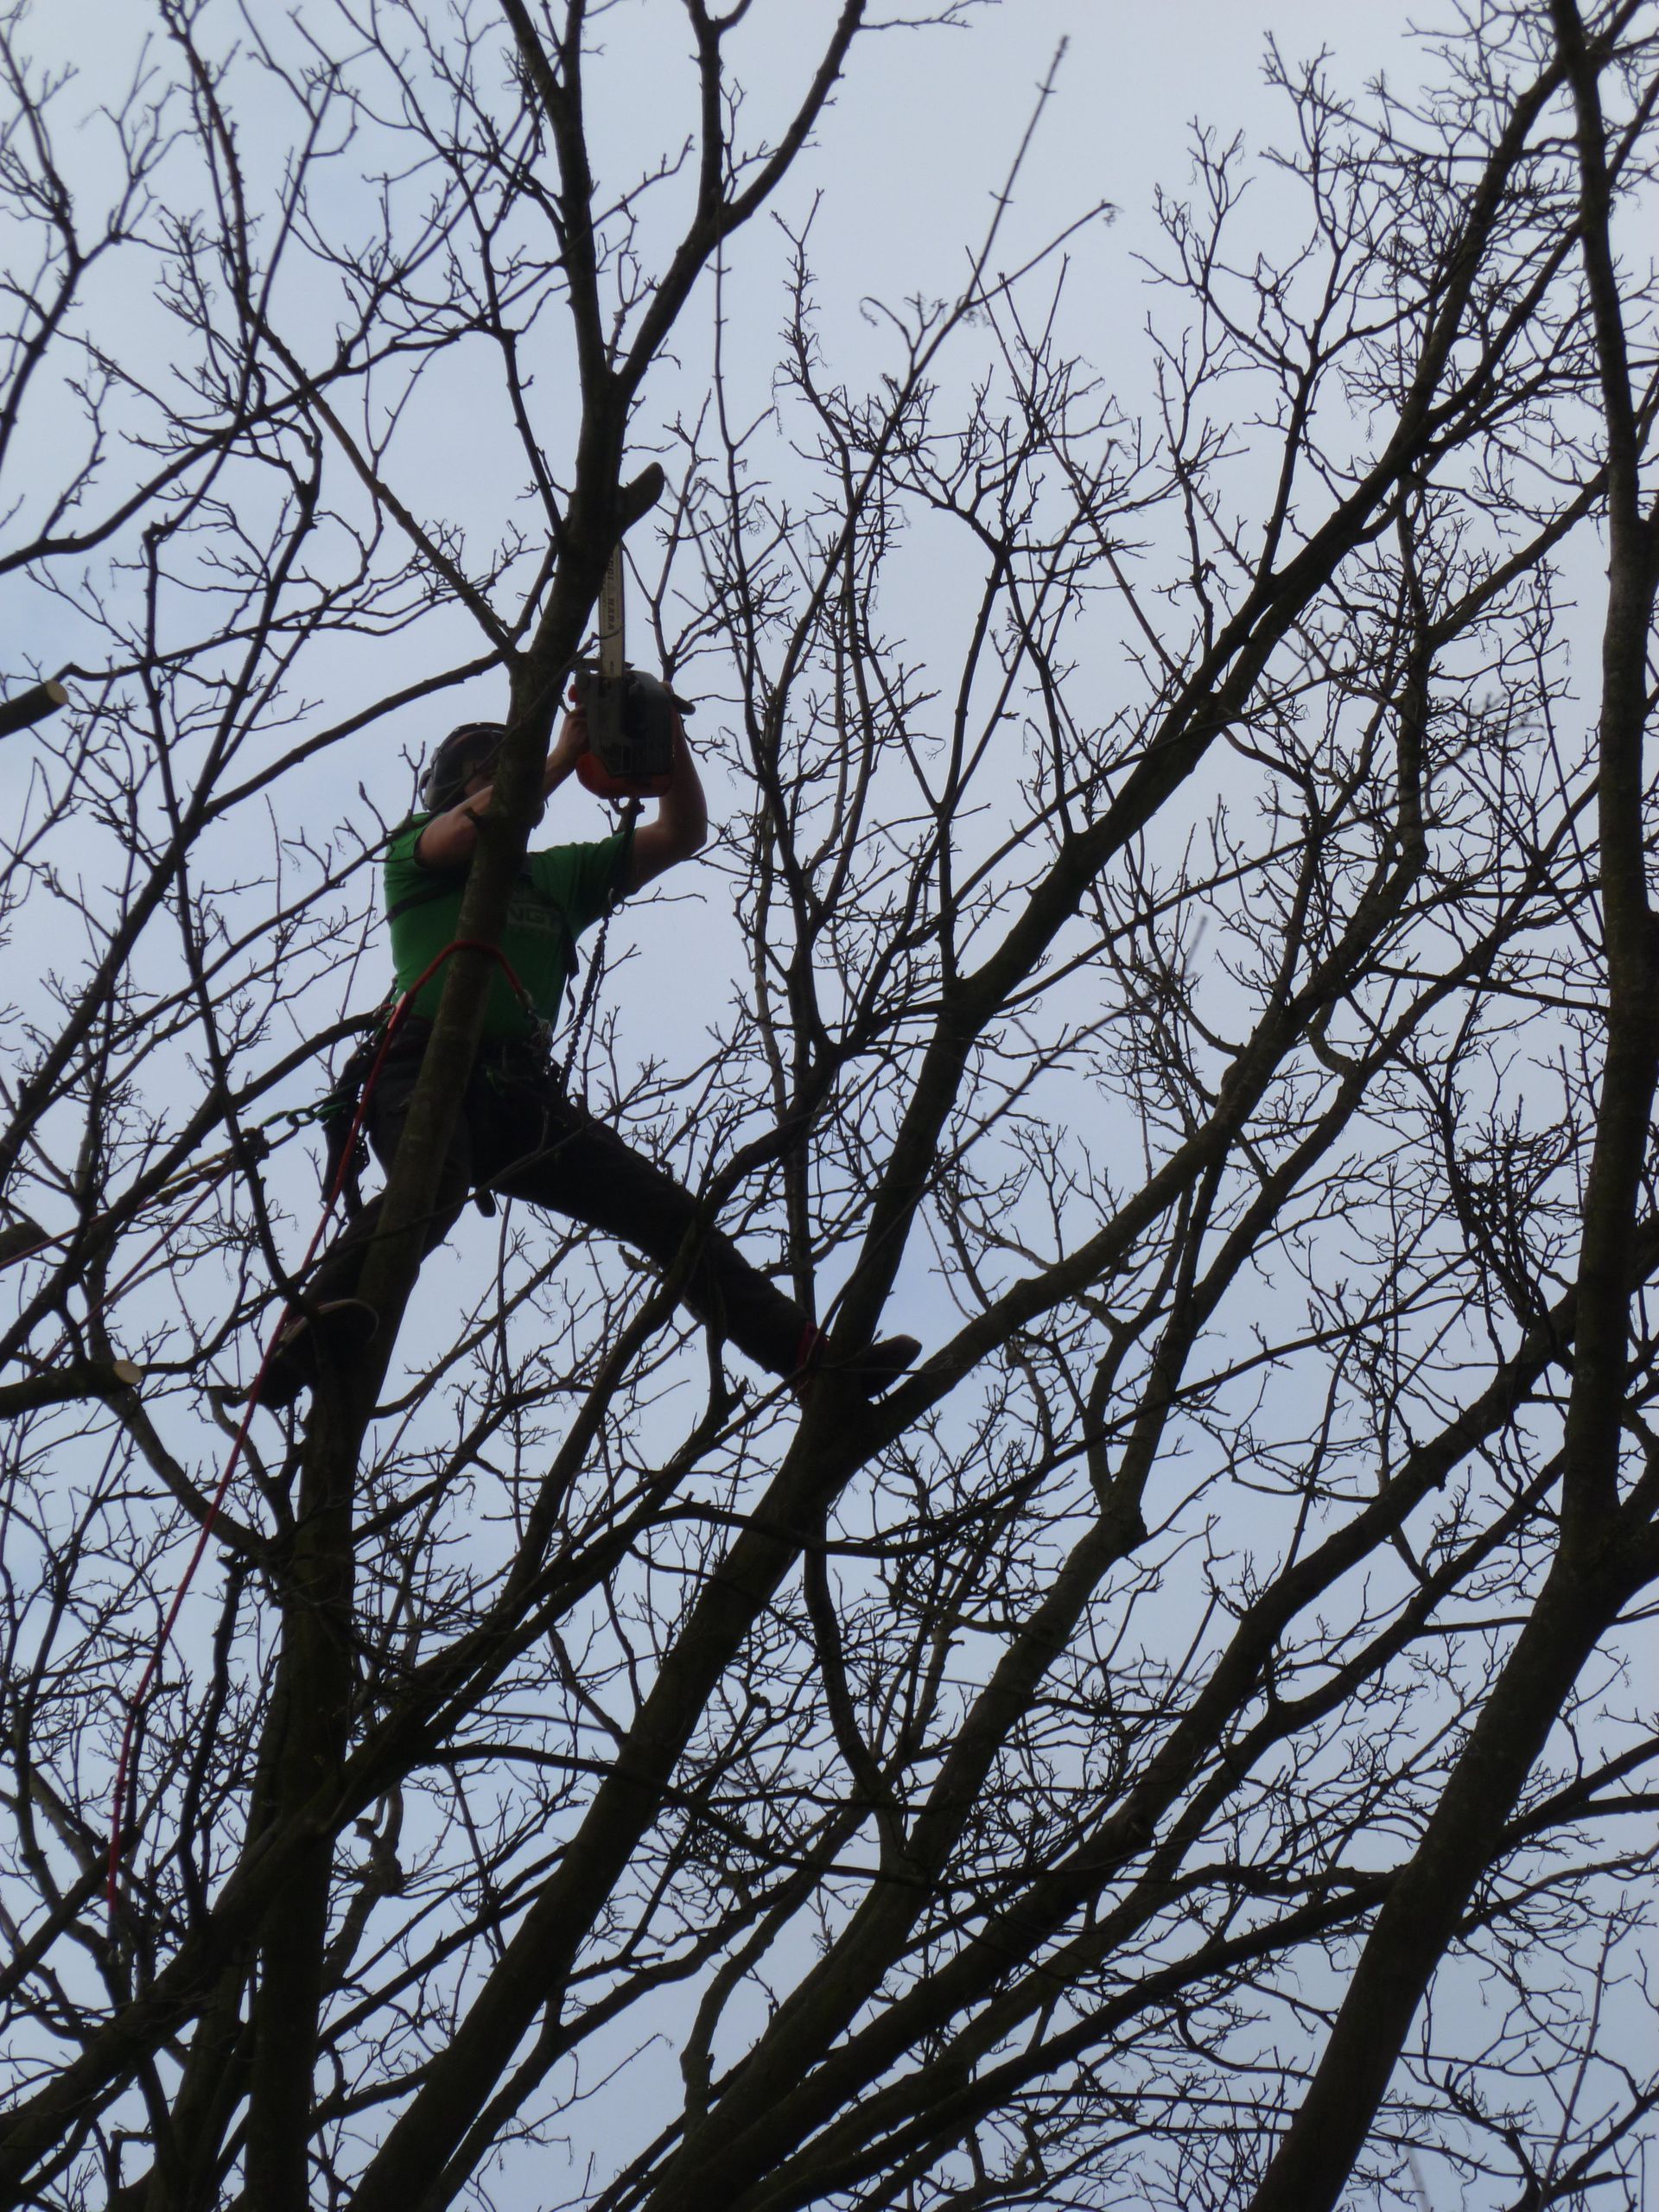 Final pruning cuts on Ash Tree in North Wales.